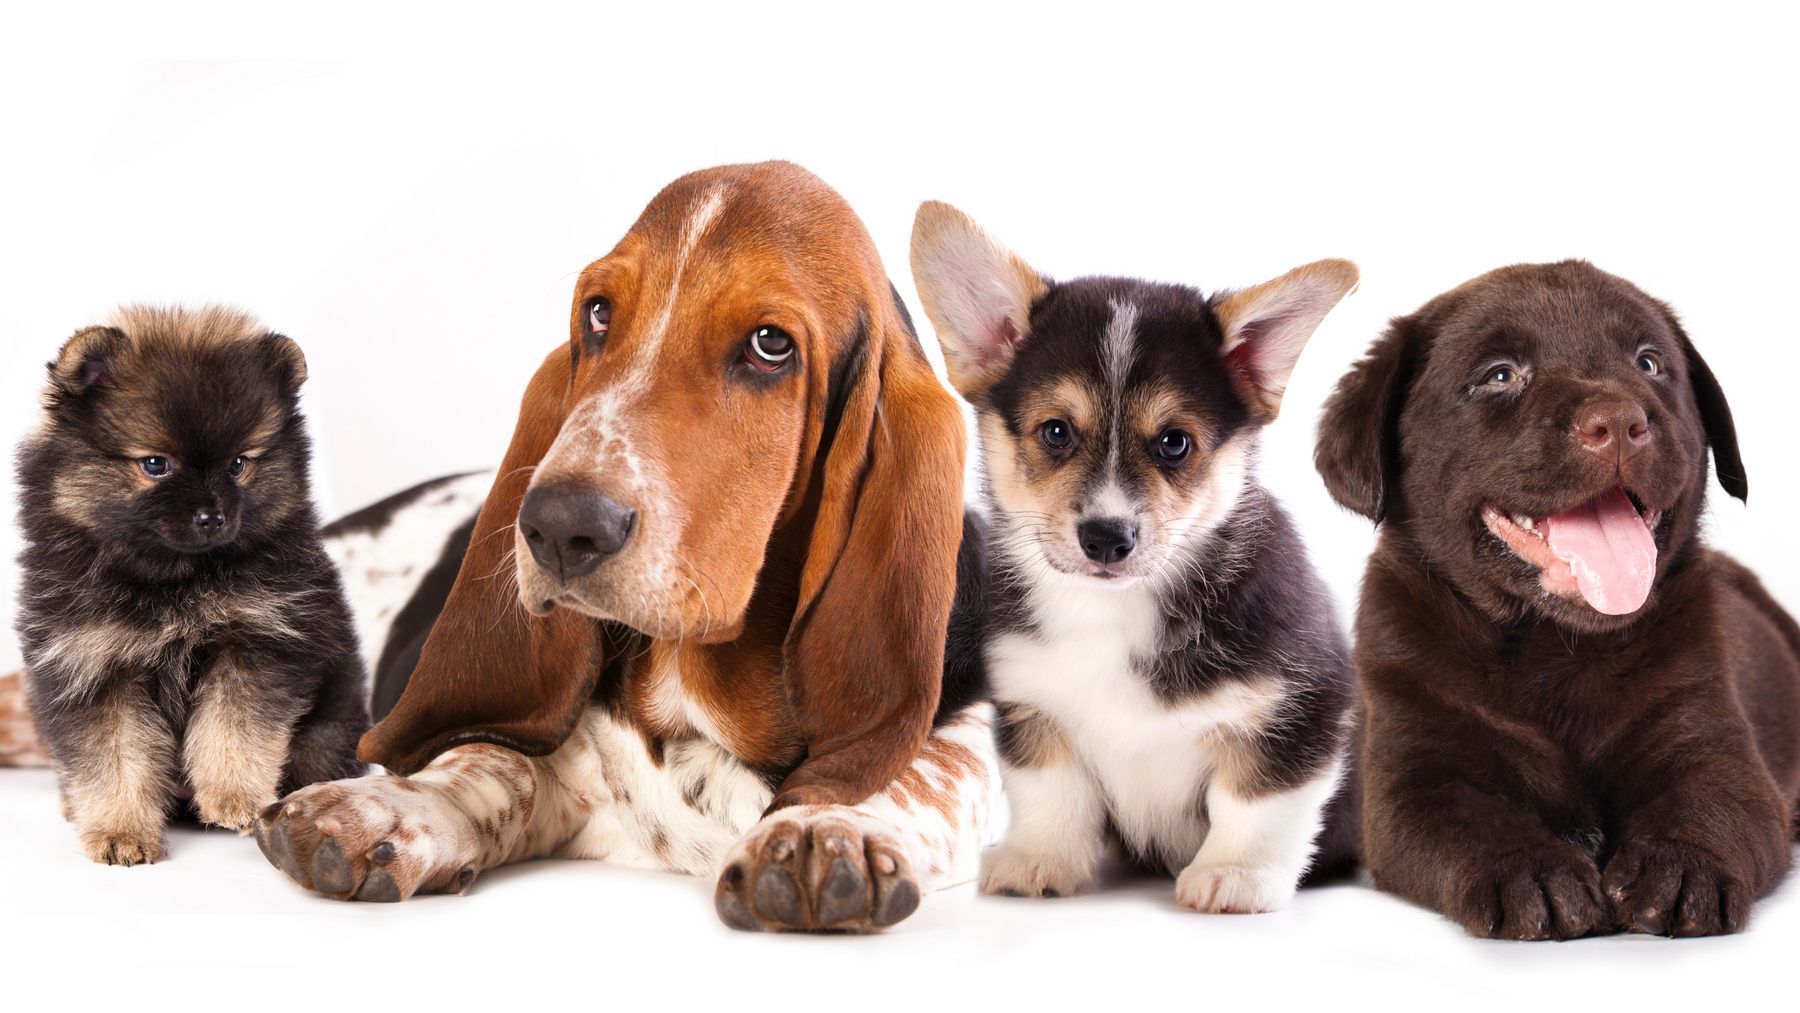 How to Puppy-Proof Your Home for Your New Furry Friend